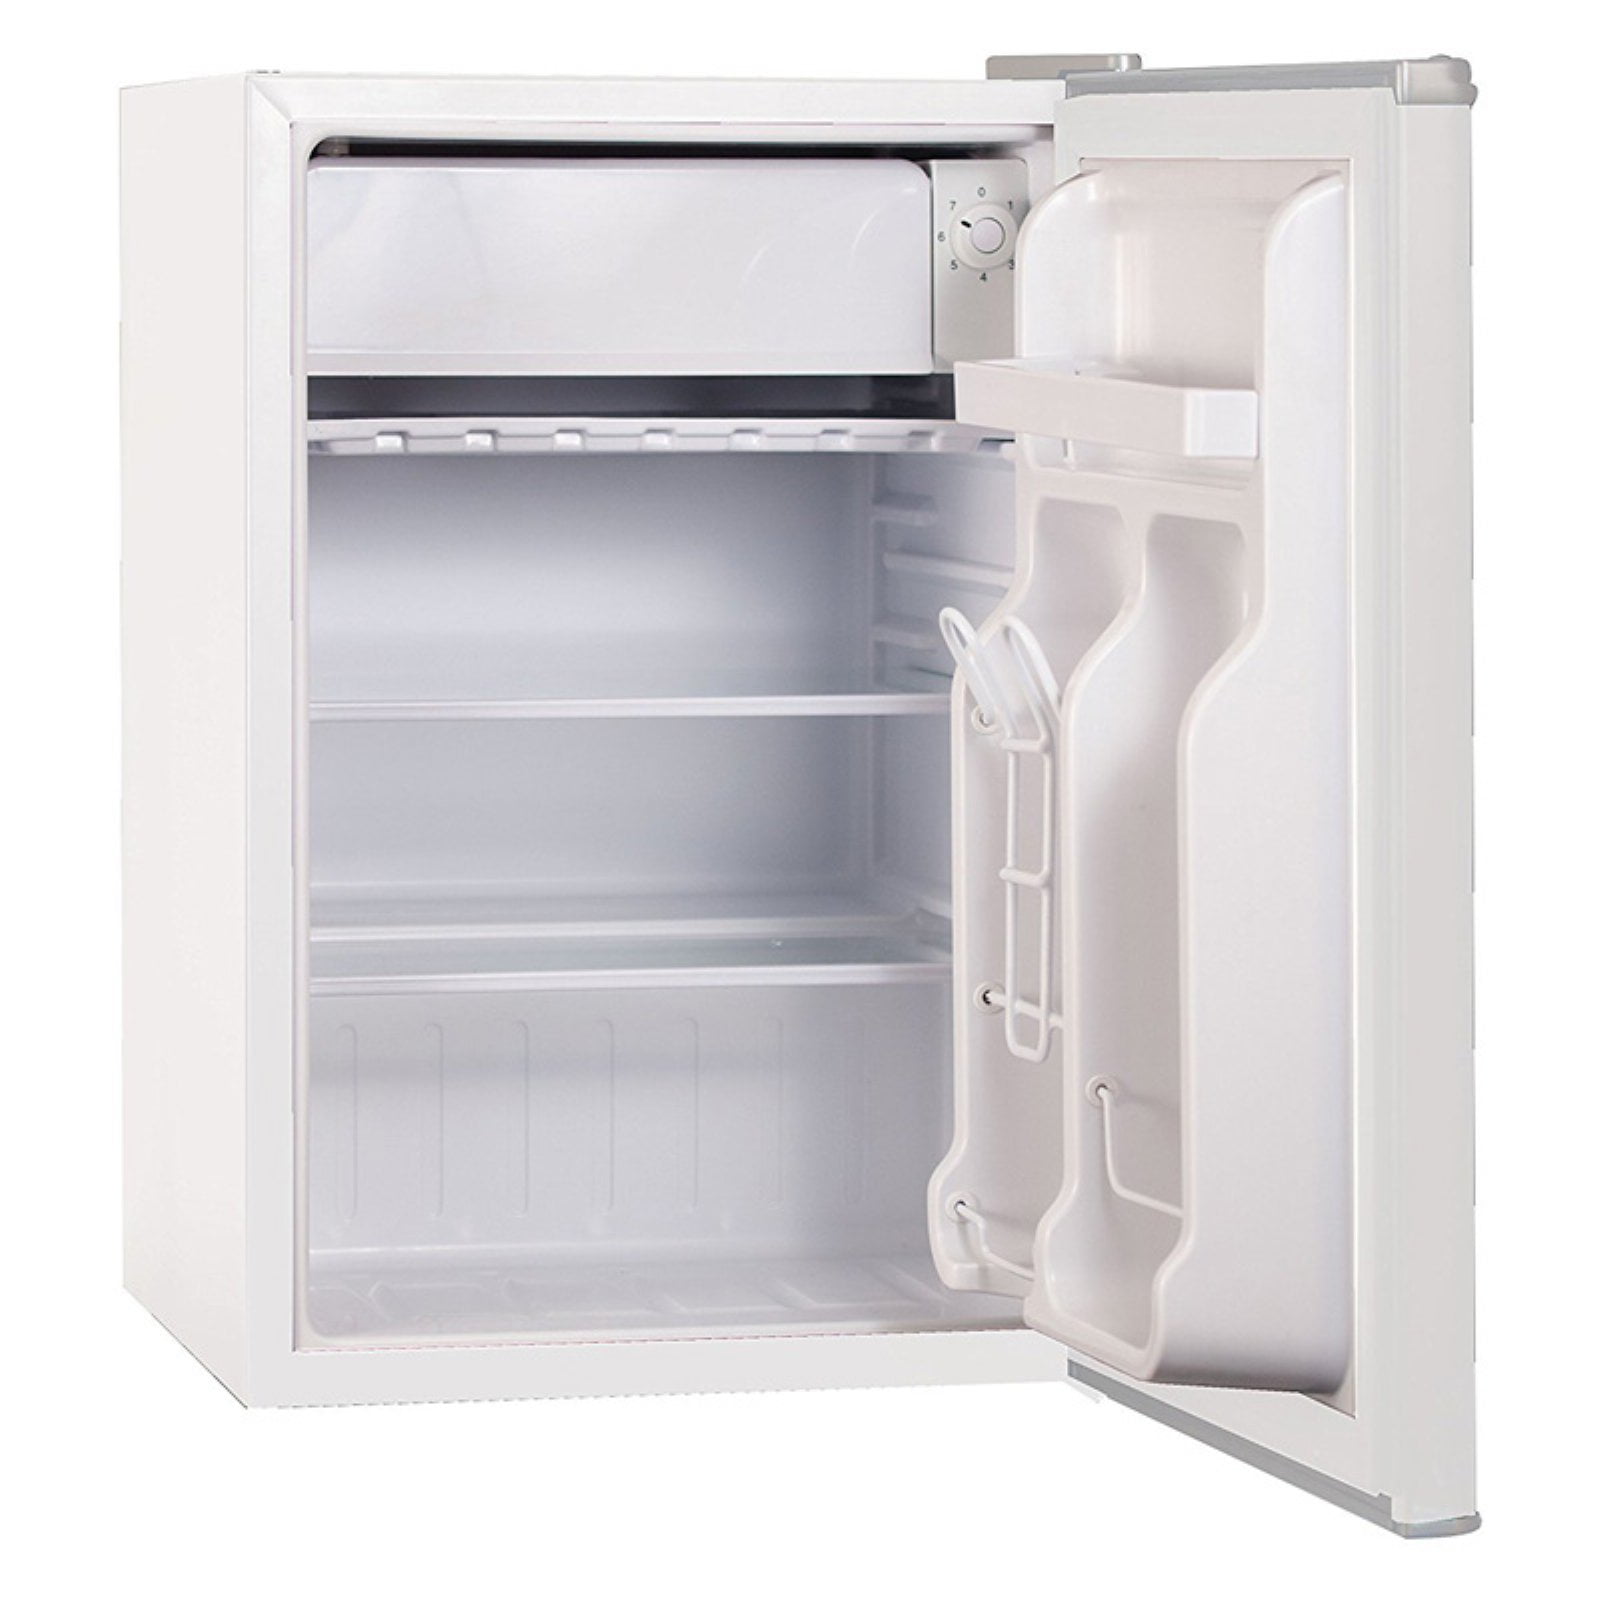 Rent to Own Black+Decker BLACK+DECKER BCRK17W Compact Refrigerator Energy  Star Single Door Mini Fridge with Freezer, 1.7 Cubic Ft., White at Aaron's  today!